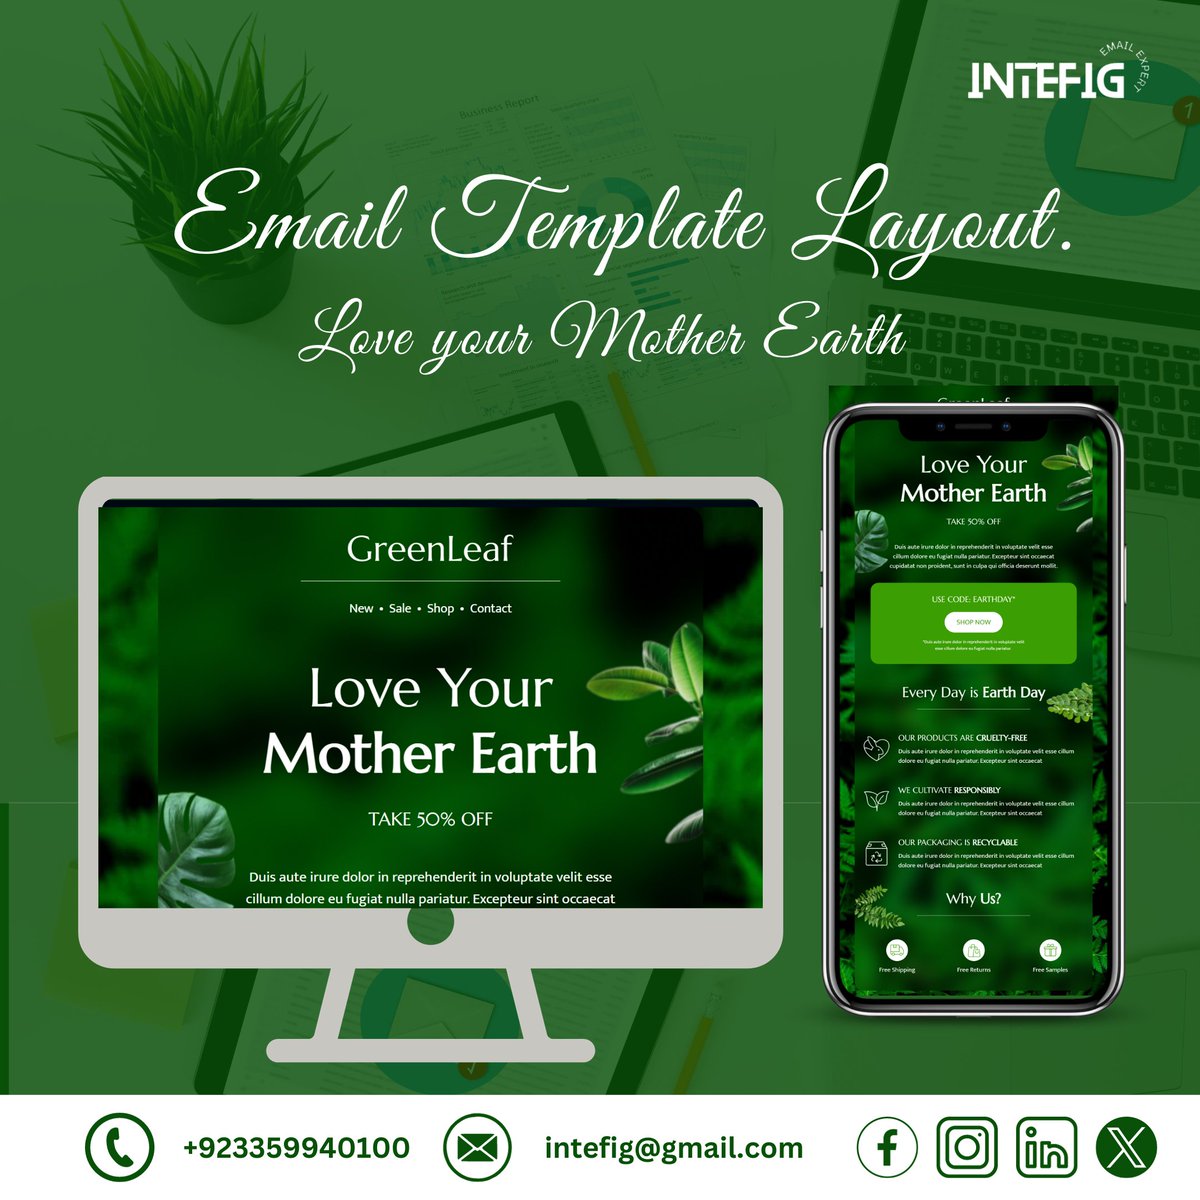 #EmailTemplate #Layout

Reach out to @Intefig_ for a free #eCommerce audit & expert #EmailMarketing consultation. Let's enhance your #Business together.

#EmailCampaign #Emailautomation #mailchimp #klaviyo  #mailerlite #Emailtemplates #LetSistersHug  #intefig #letsconnect #ROI